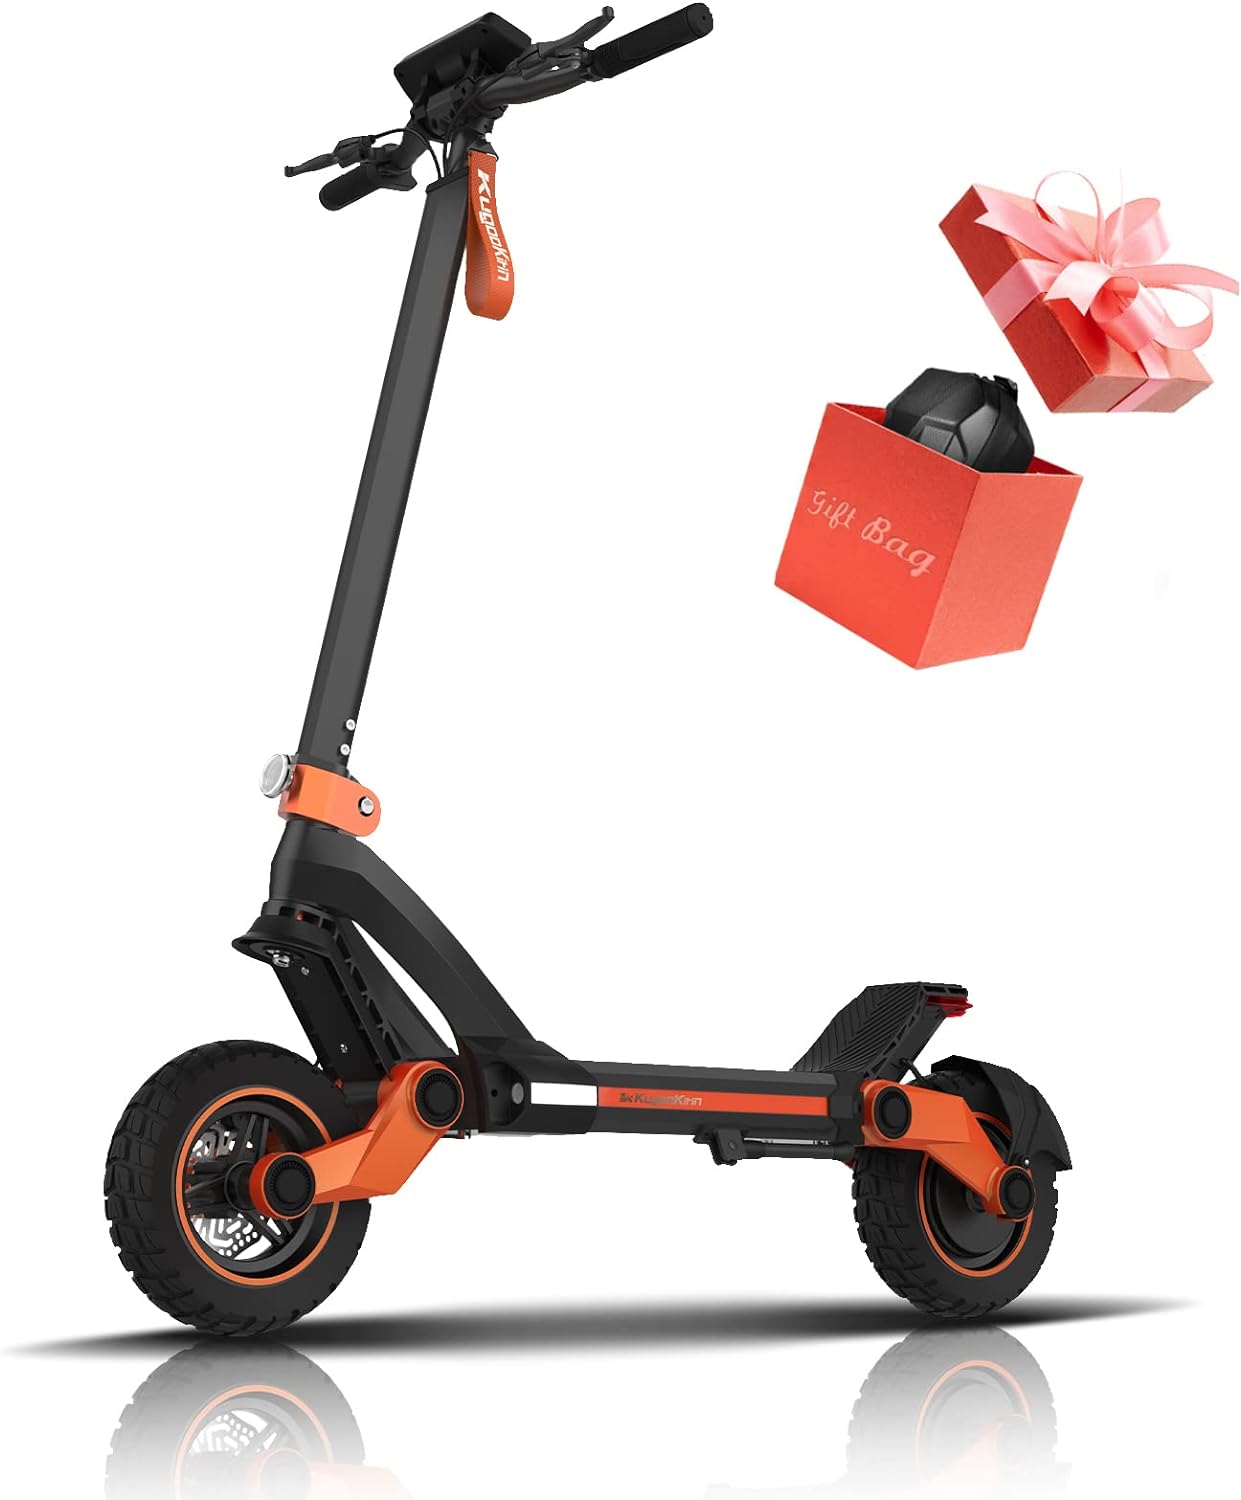 Kugookirin G3 Electric Scooter Review